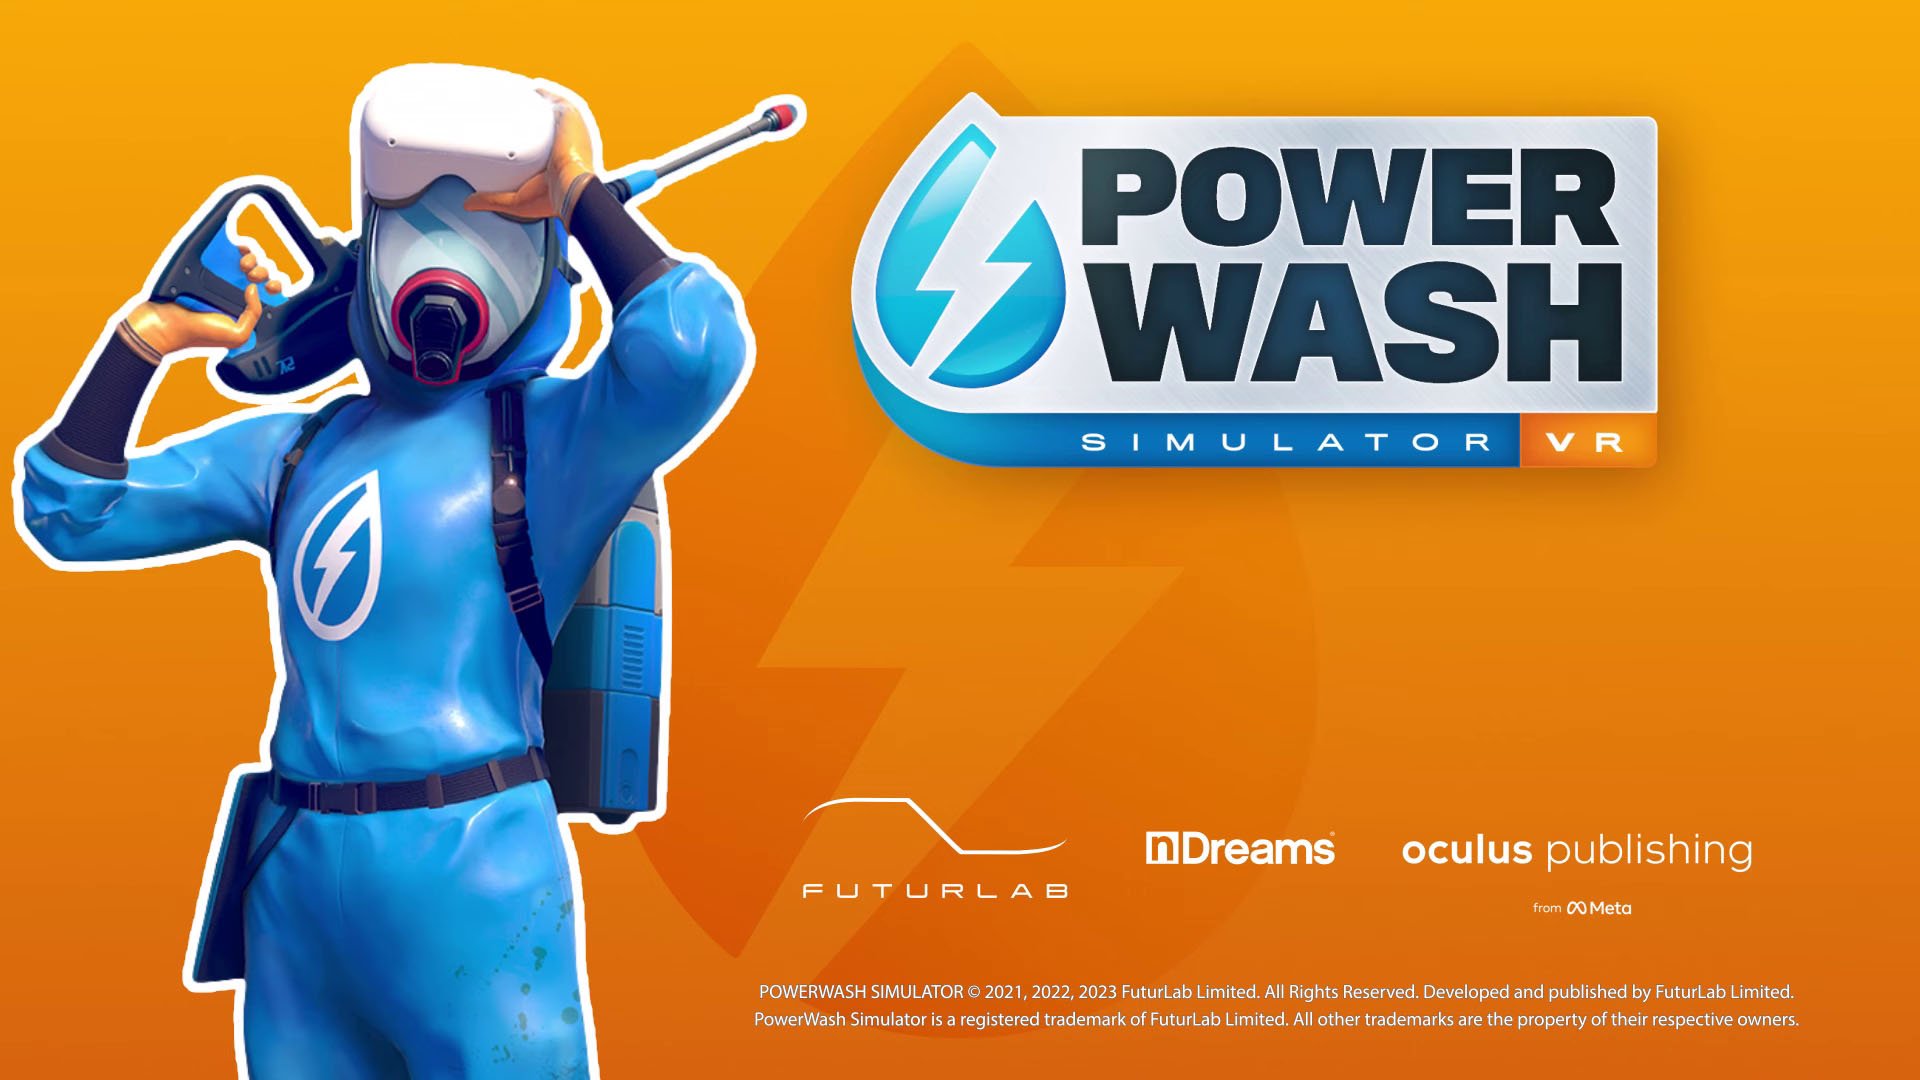 PowerWash Simulator - Physical Copies Available Soon and Why You